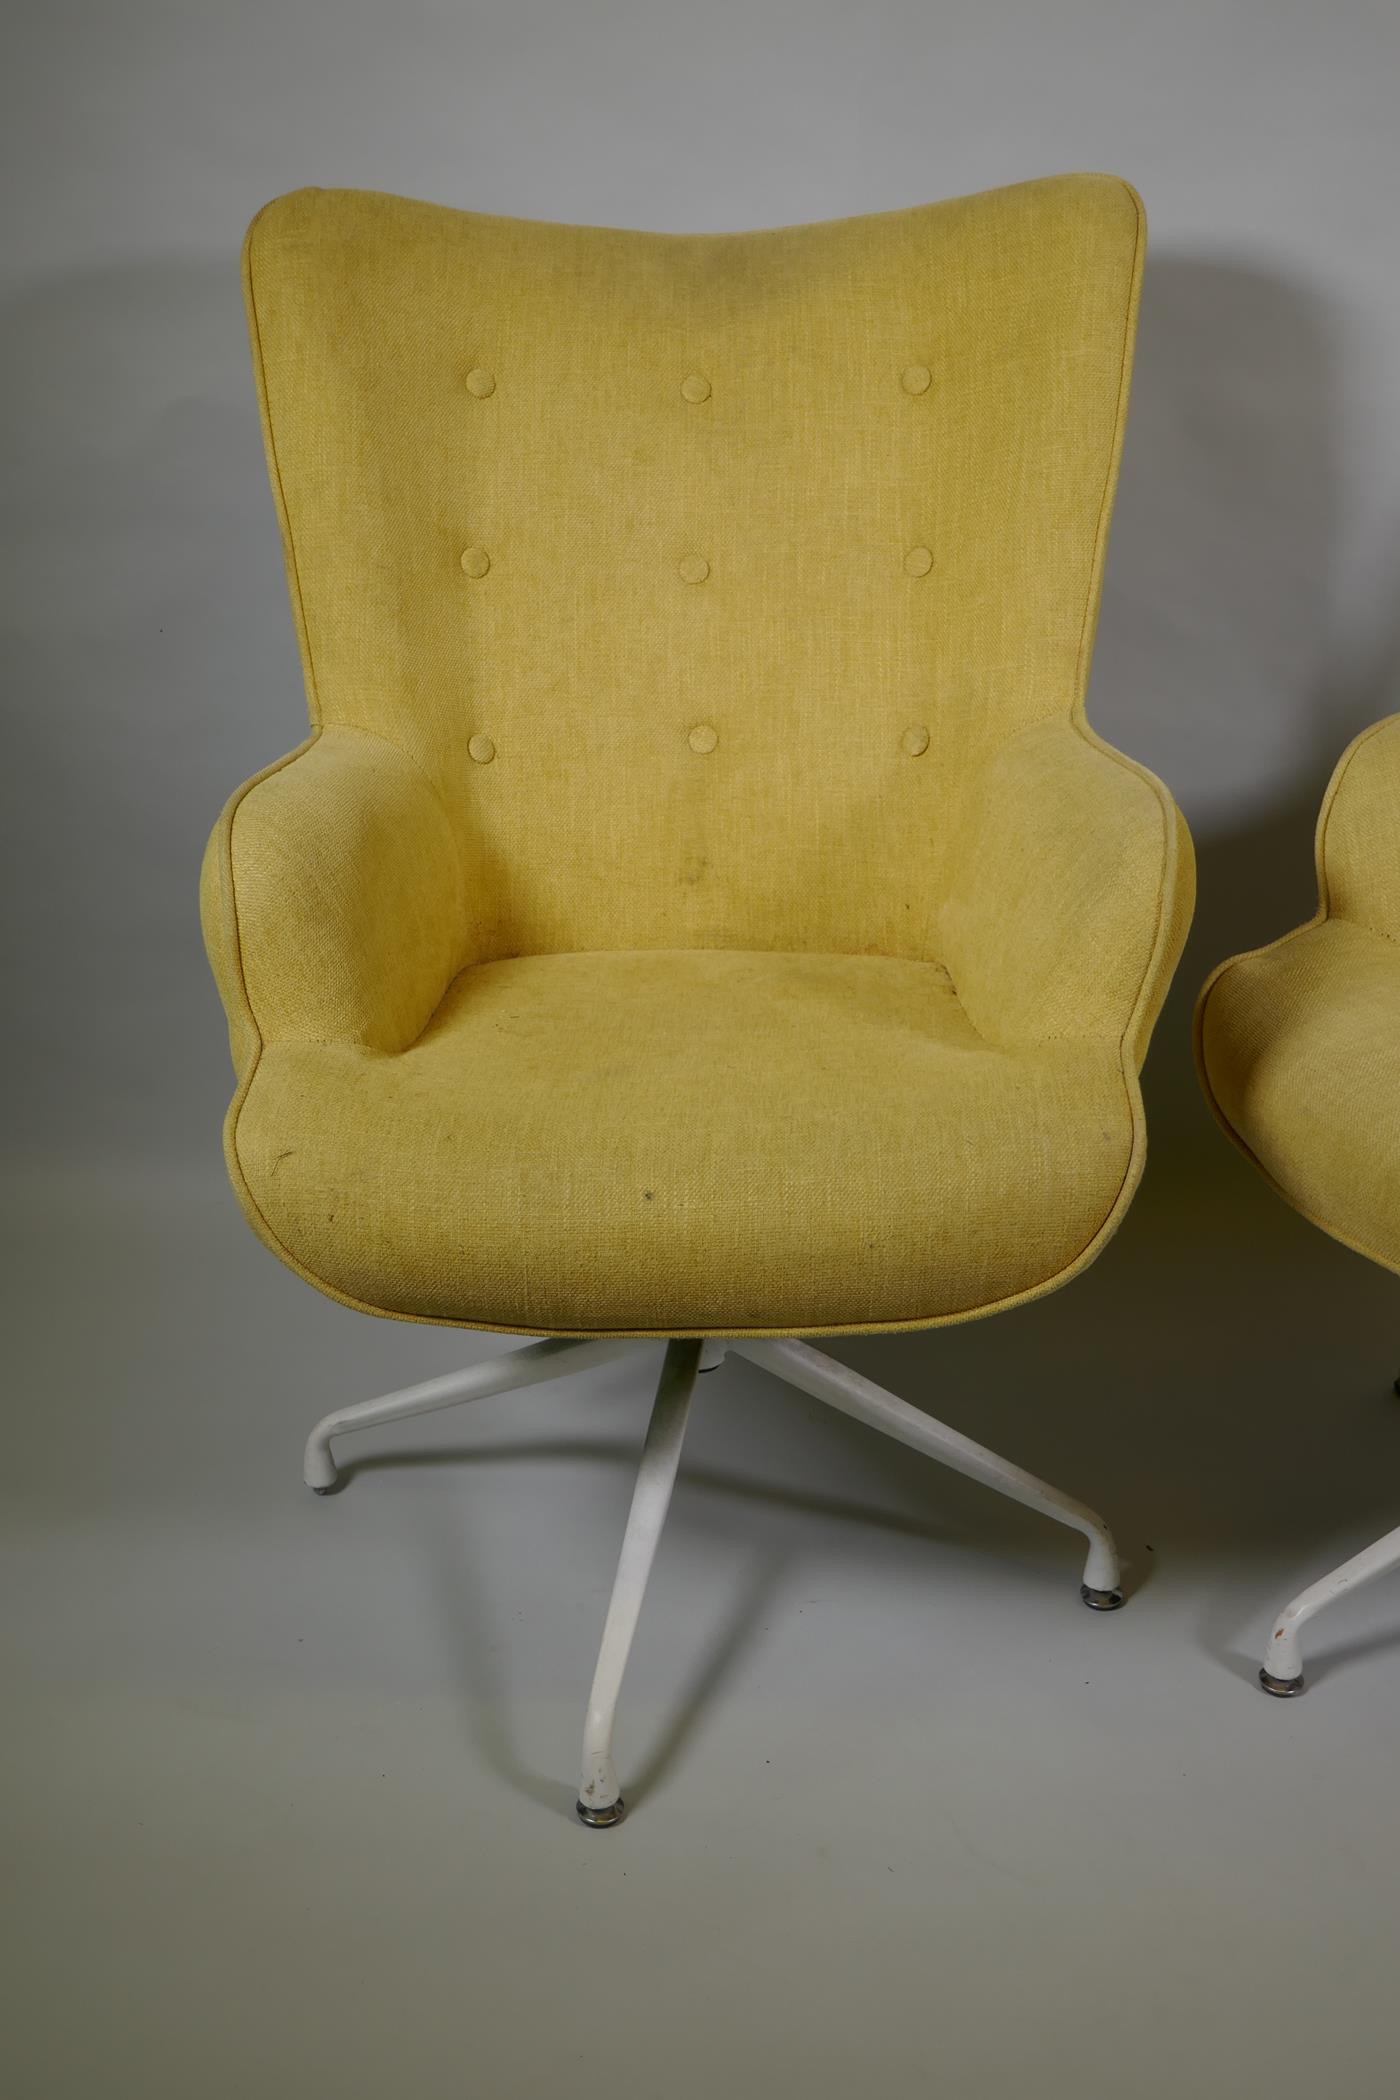 A pair of reclining swivel armchairs on spider legs - Image 2 of 4